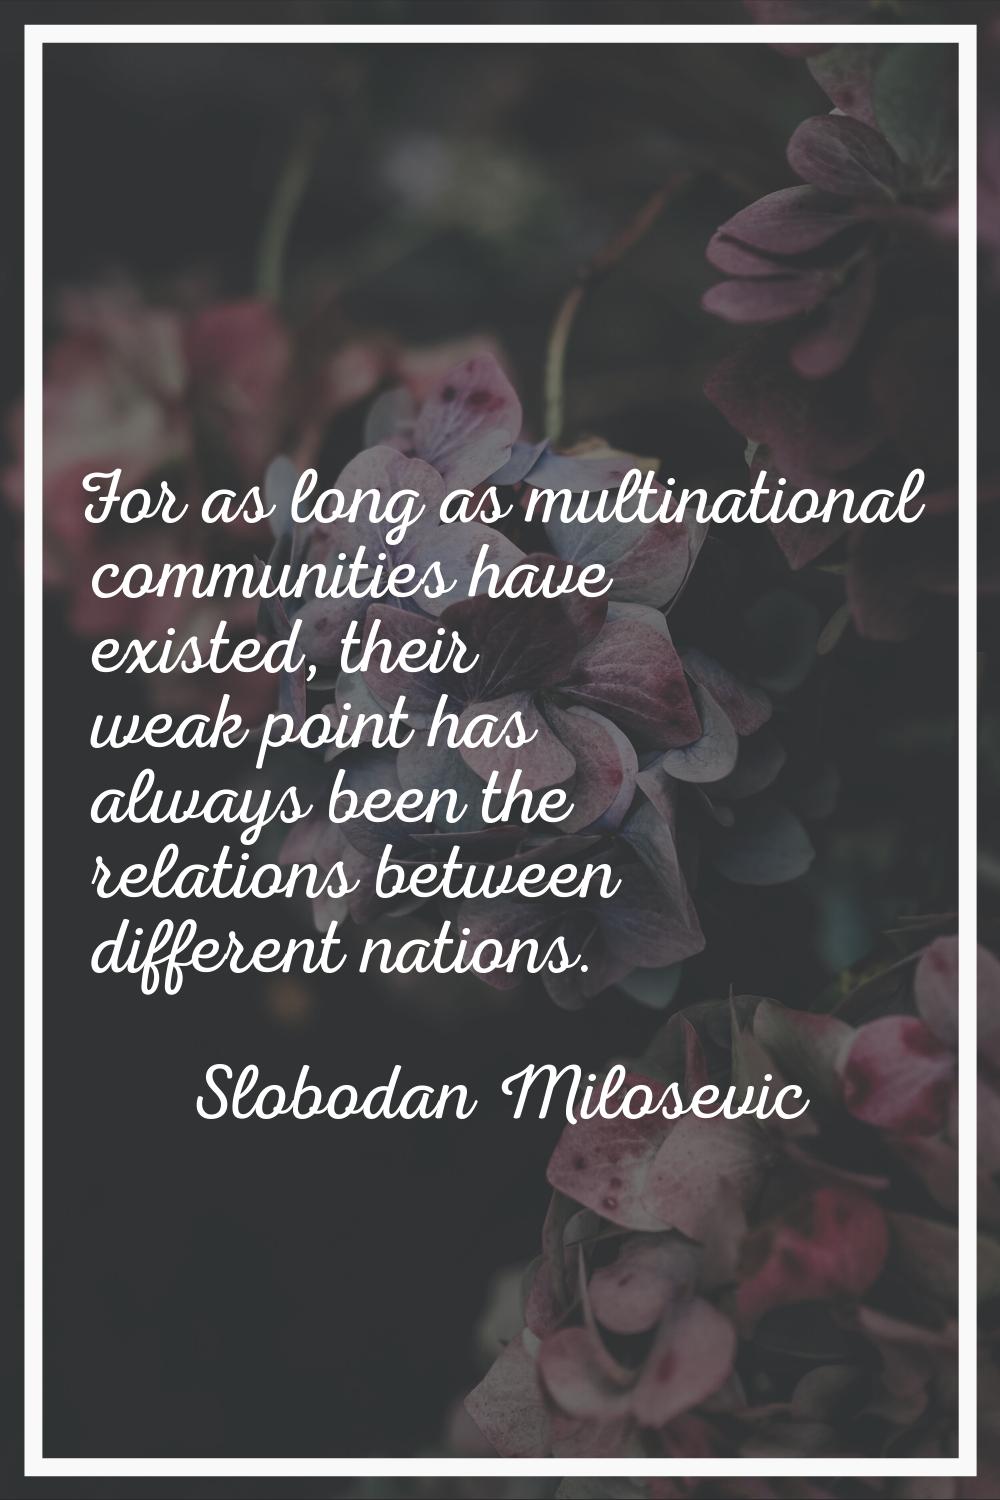 For as long as multinational communities have existed, their weak point has always been the relatio